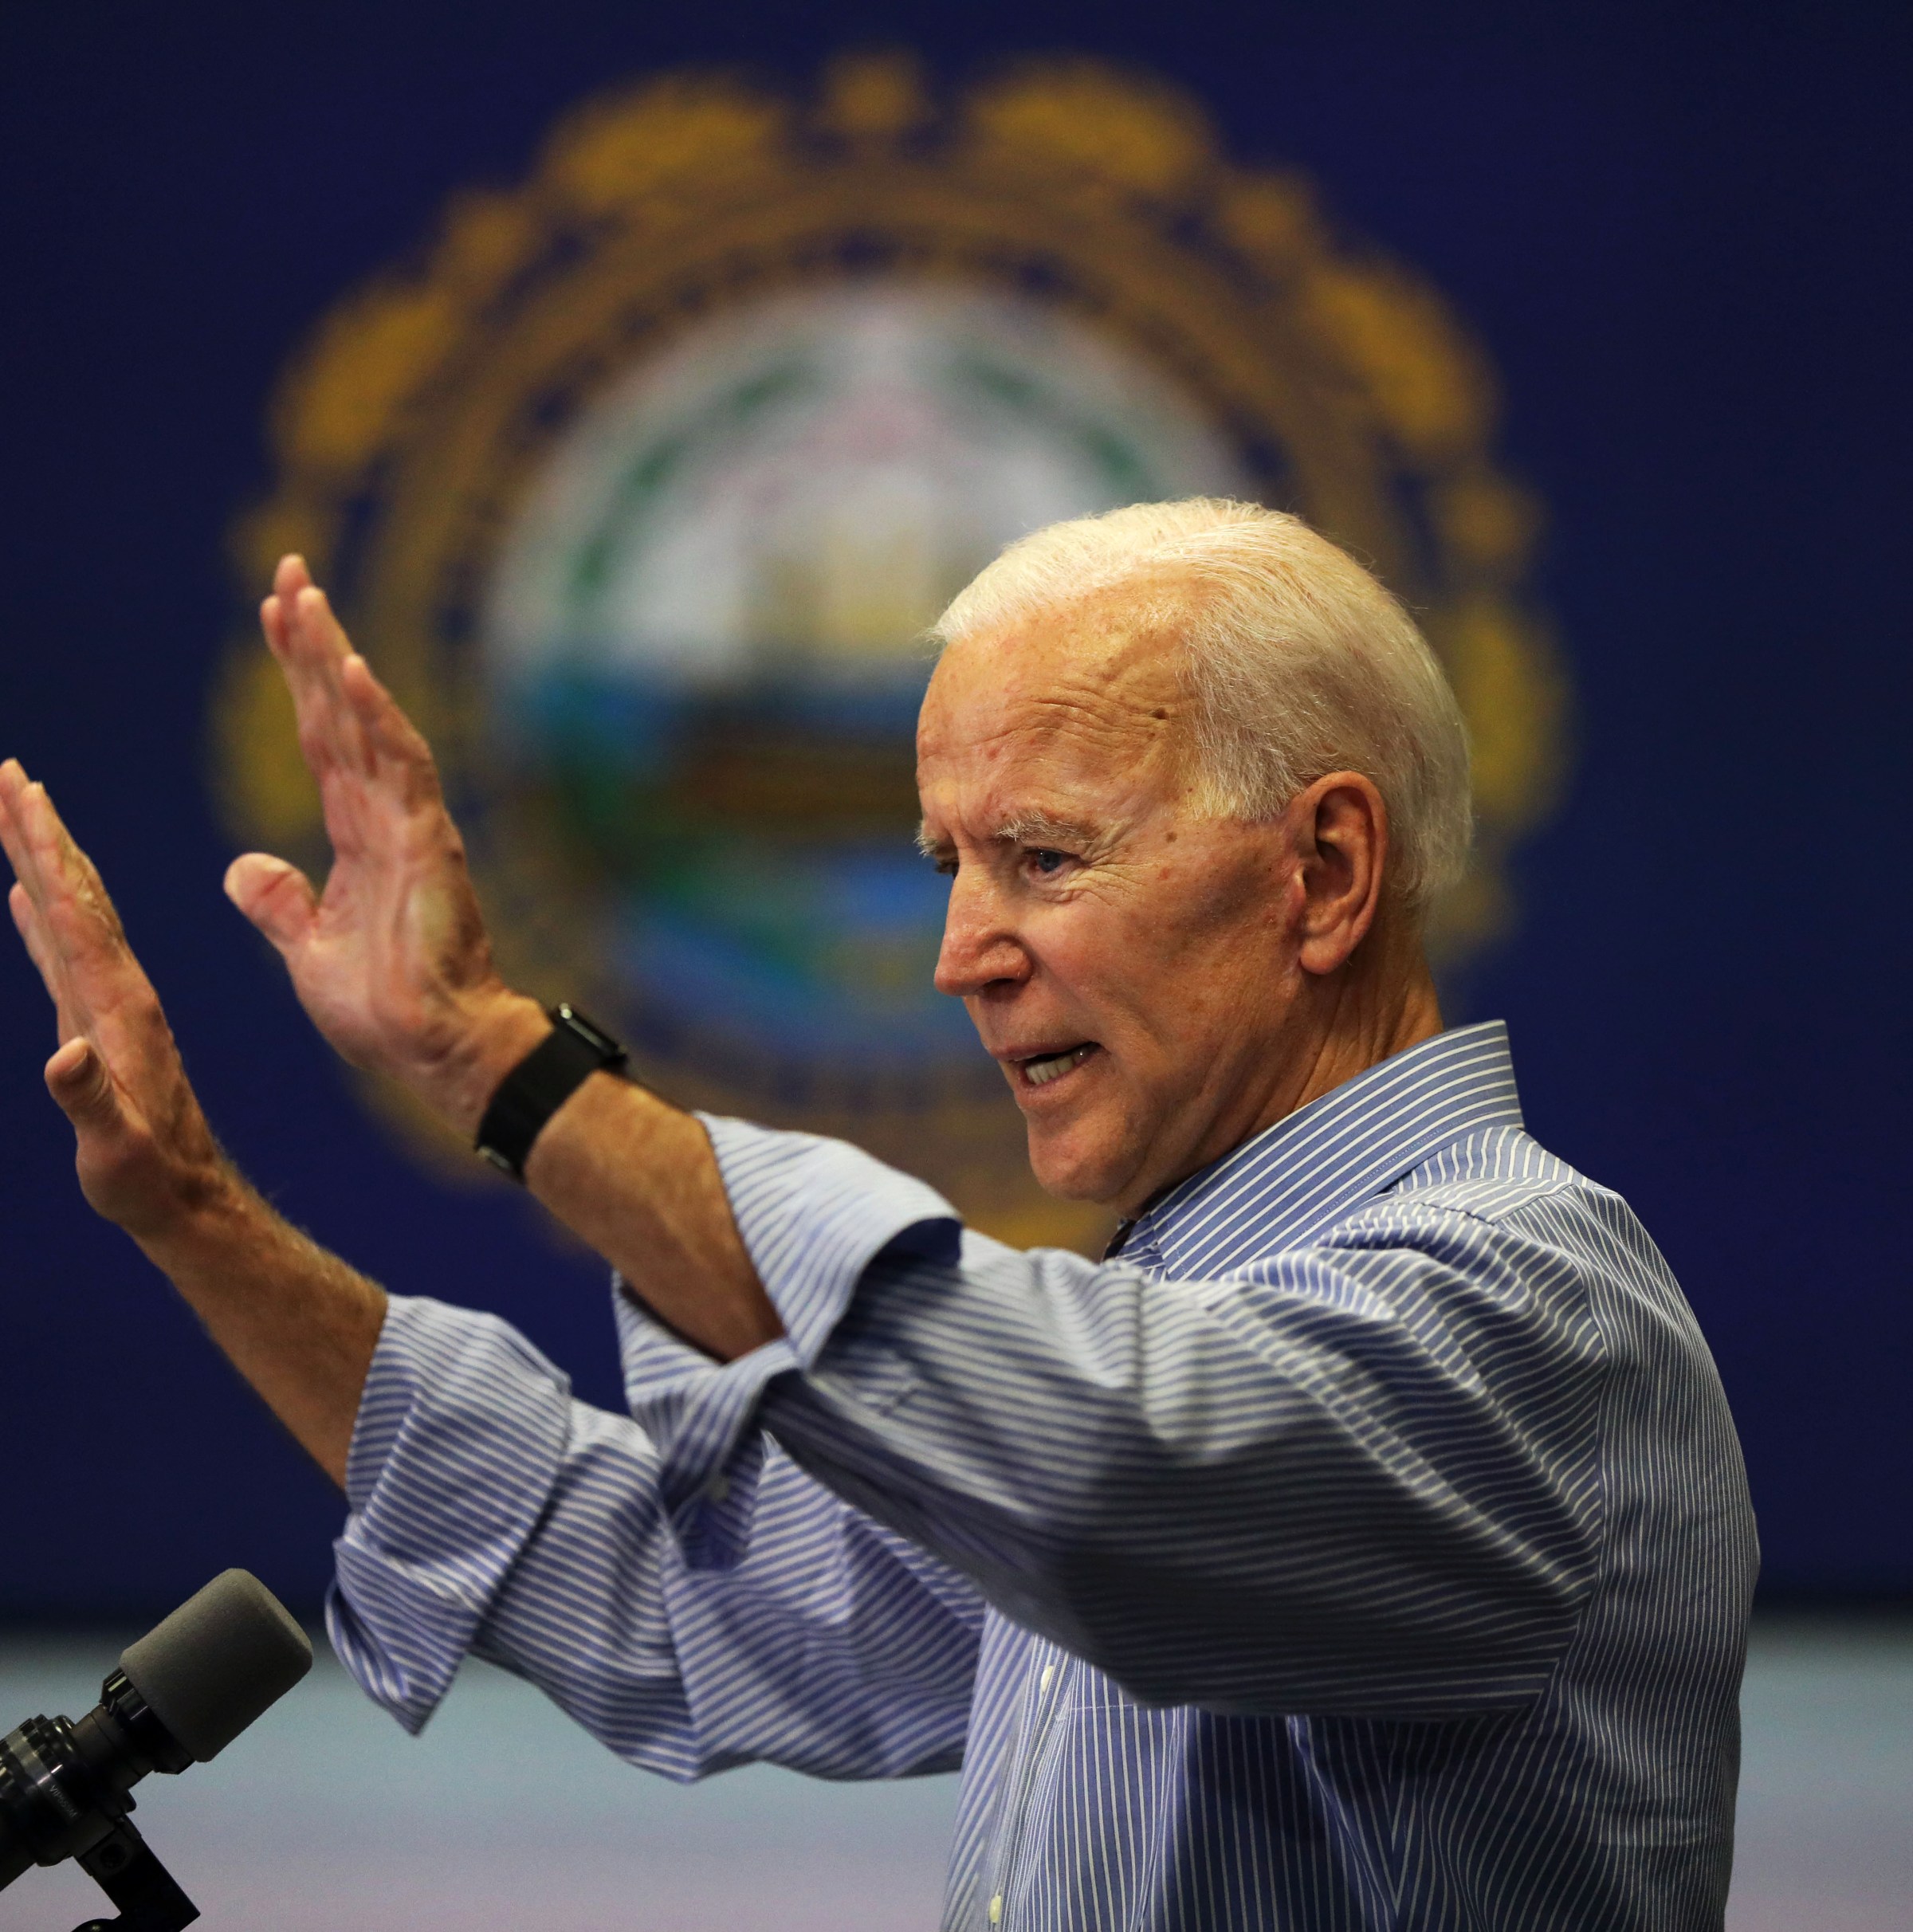 The problem with Joe Biden’s Republican “epiphany” theory of bipartisanship